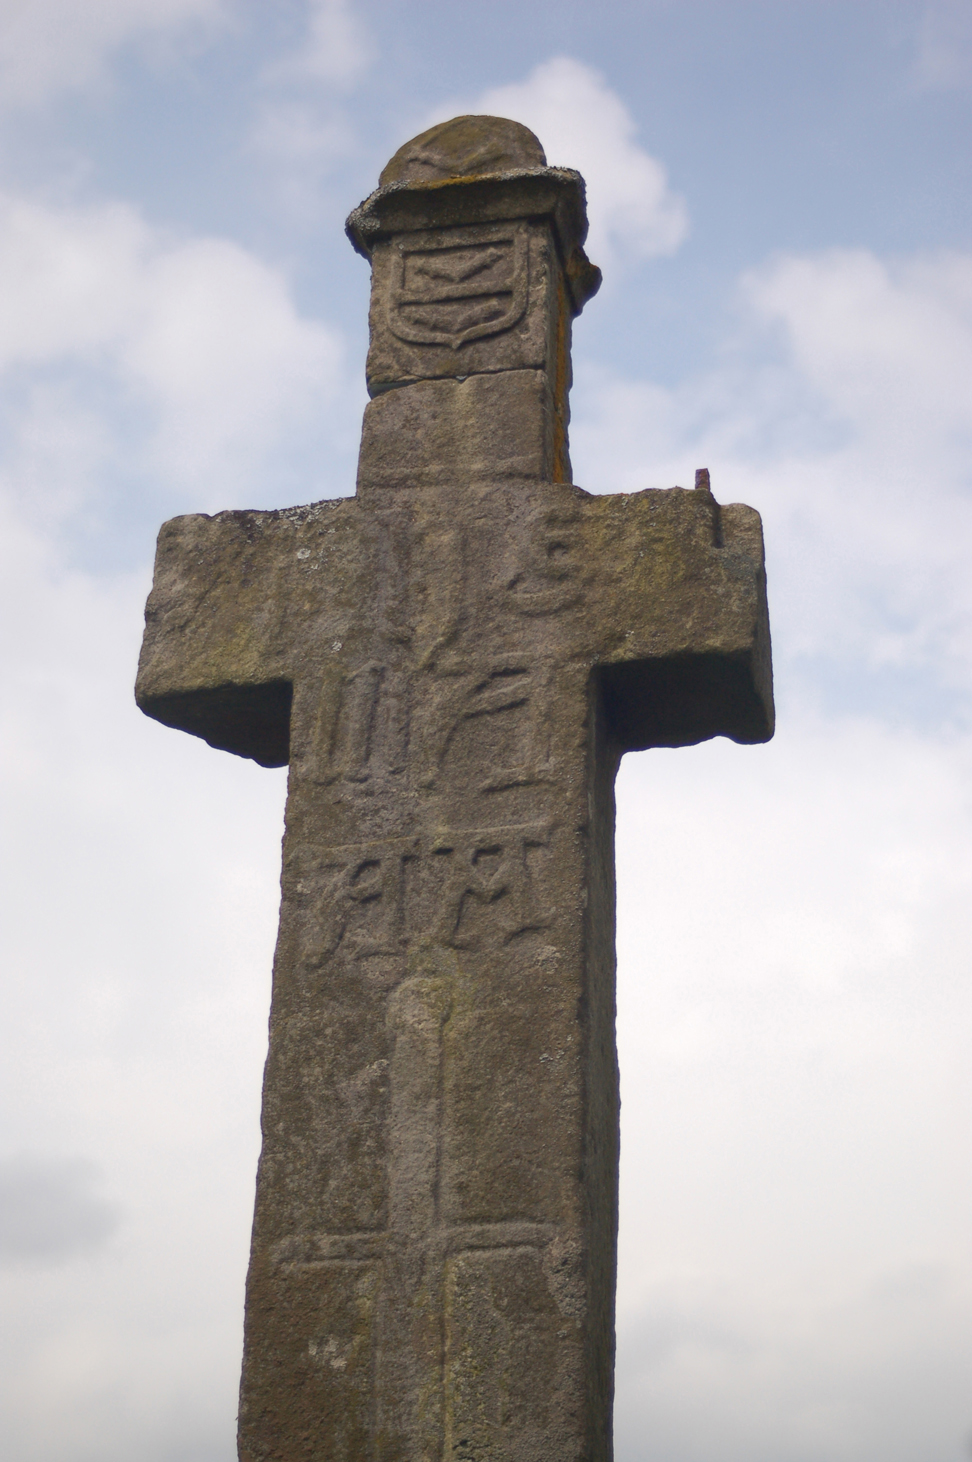 The 700-year old Milnholm Cross at Castleton, Scotland, is one of the most ancient Clan Armstrong relics.